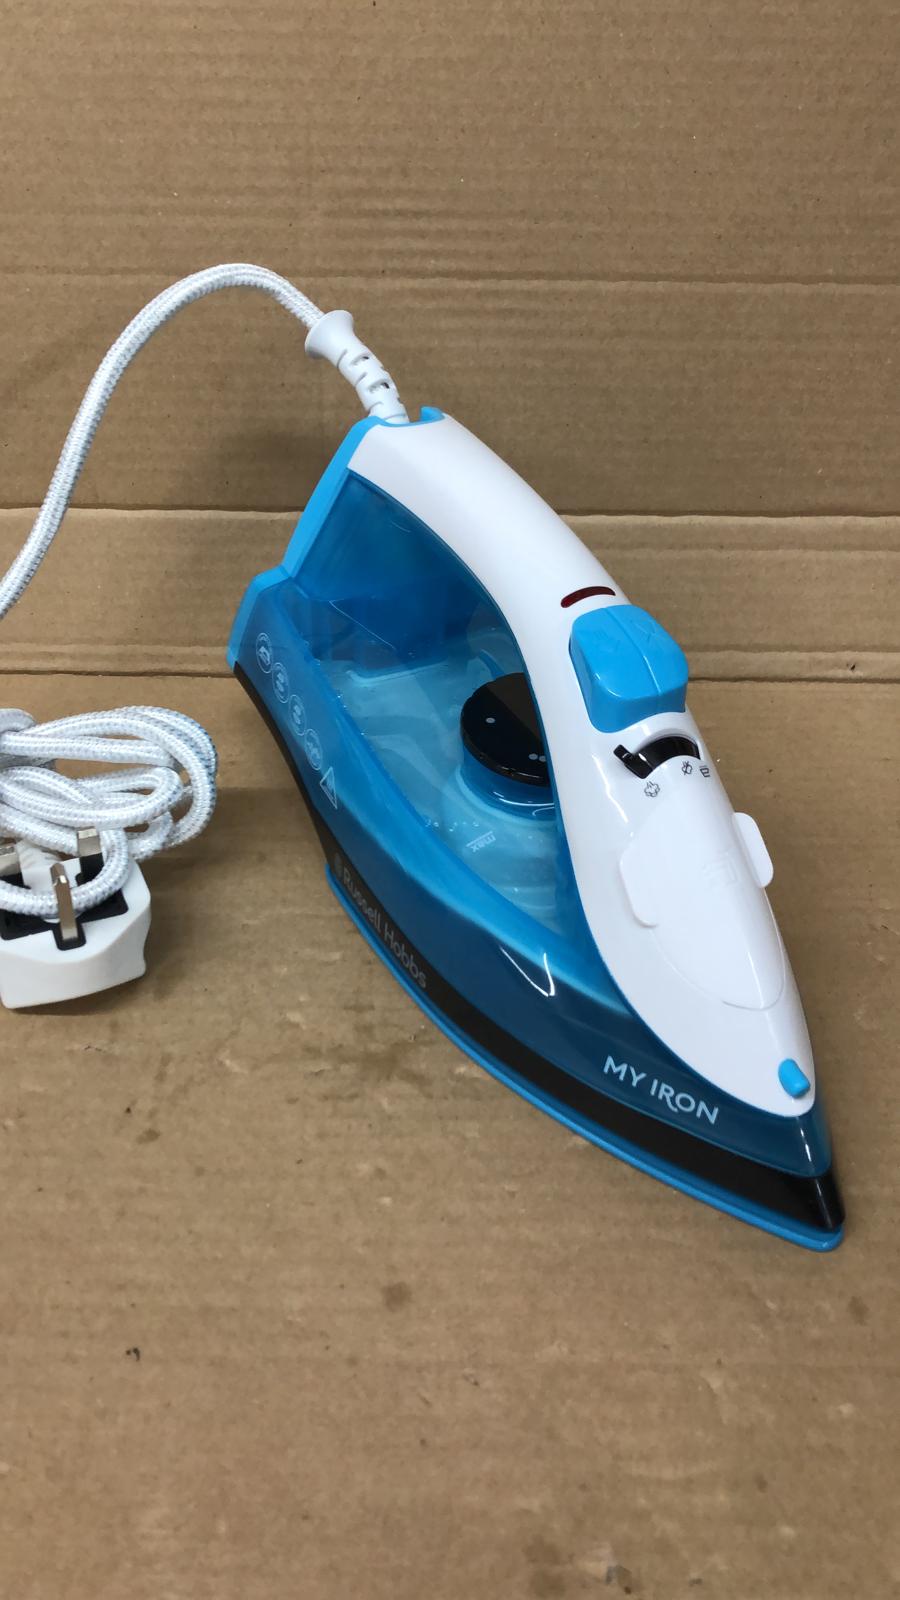 Russell Hobbs 25580 Steam Iron 1800W, 0.26L Water Tank - Blue and White-0849